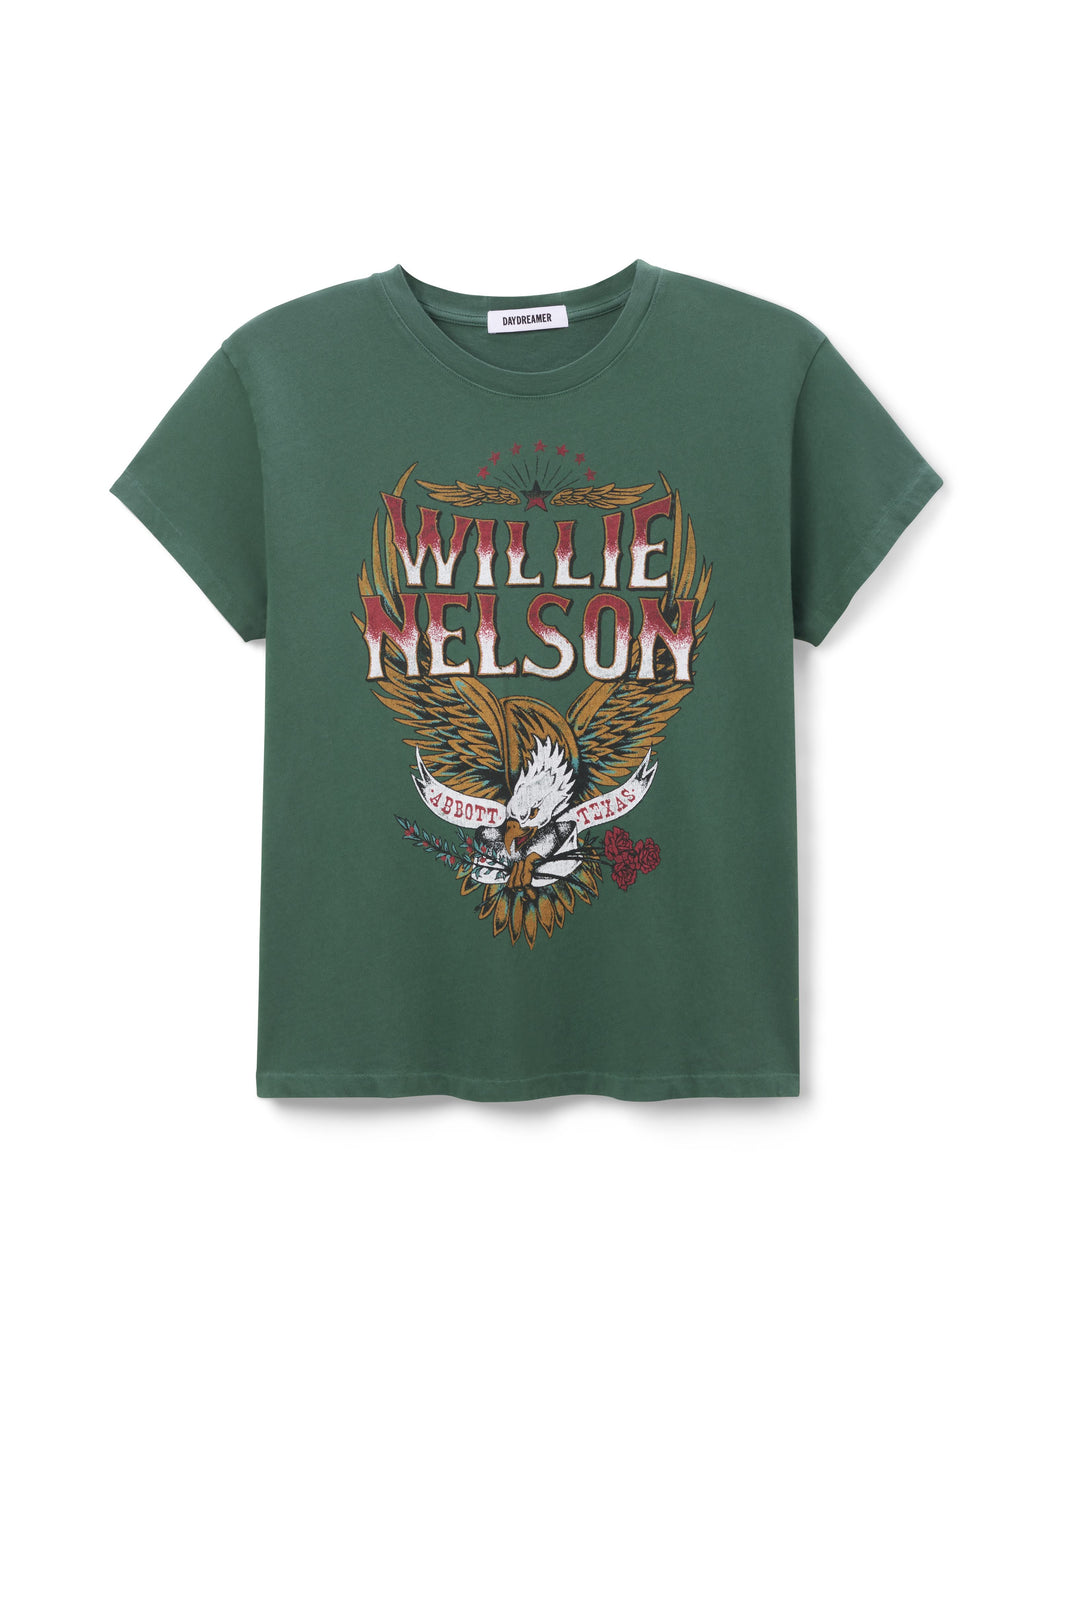 WILLIE NELSON TEXAS TOUR TEE-STORMY GREEN - Kingfisher Road - Online Boutique